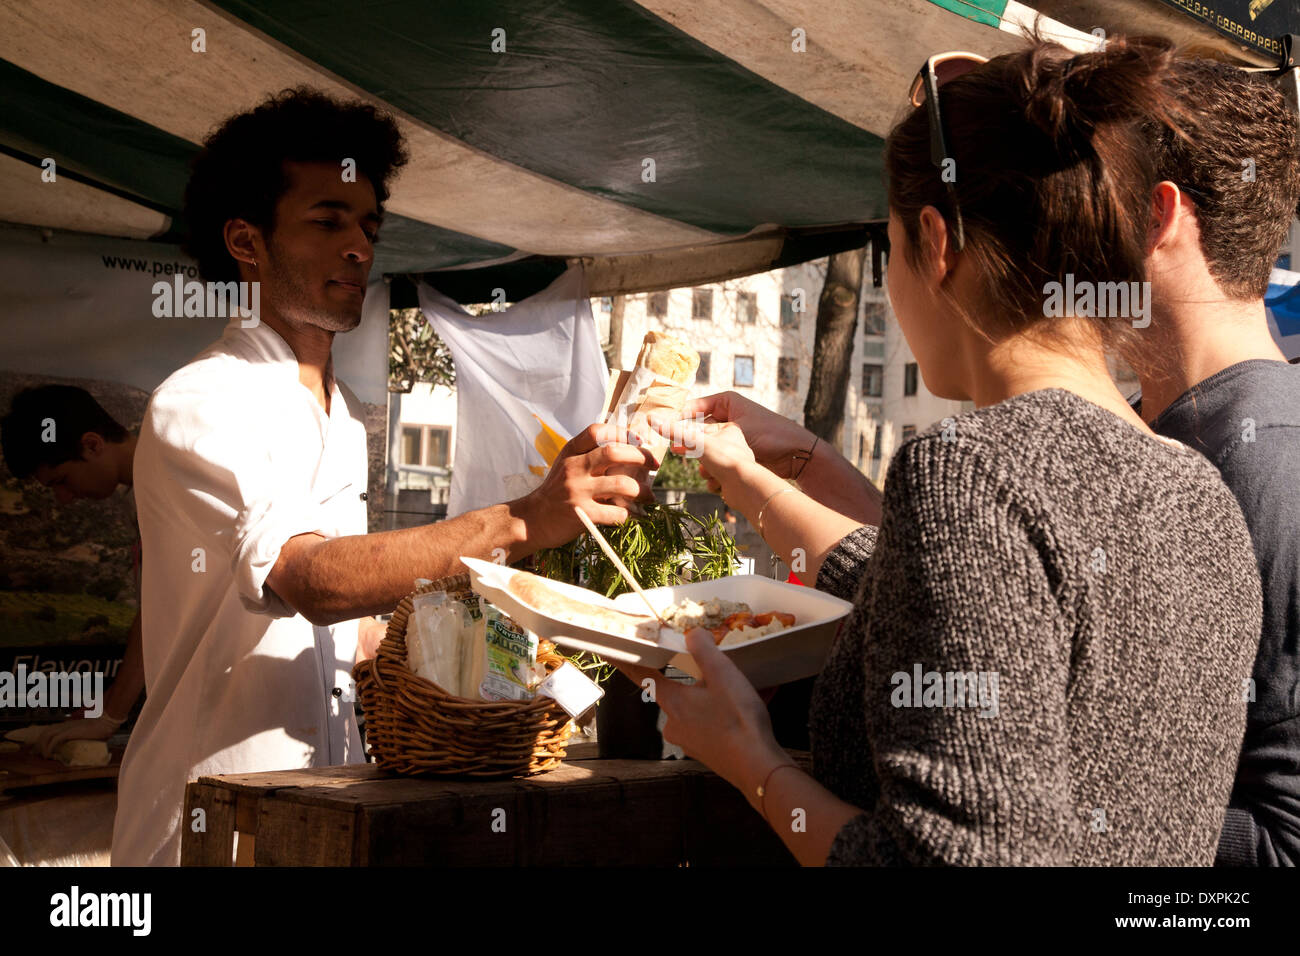 Cypriot food stand at food market in Southbank, London. Stock Photo